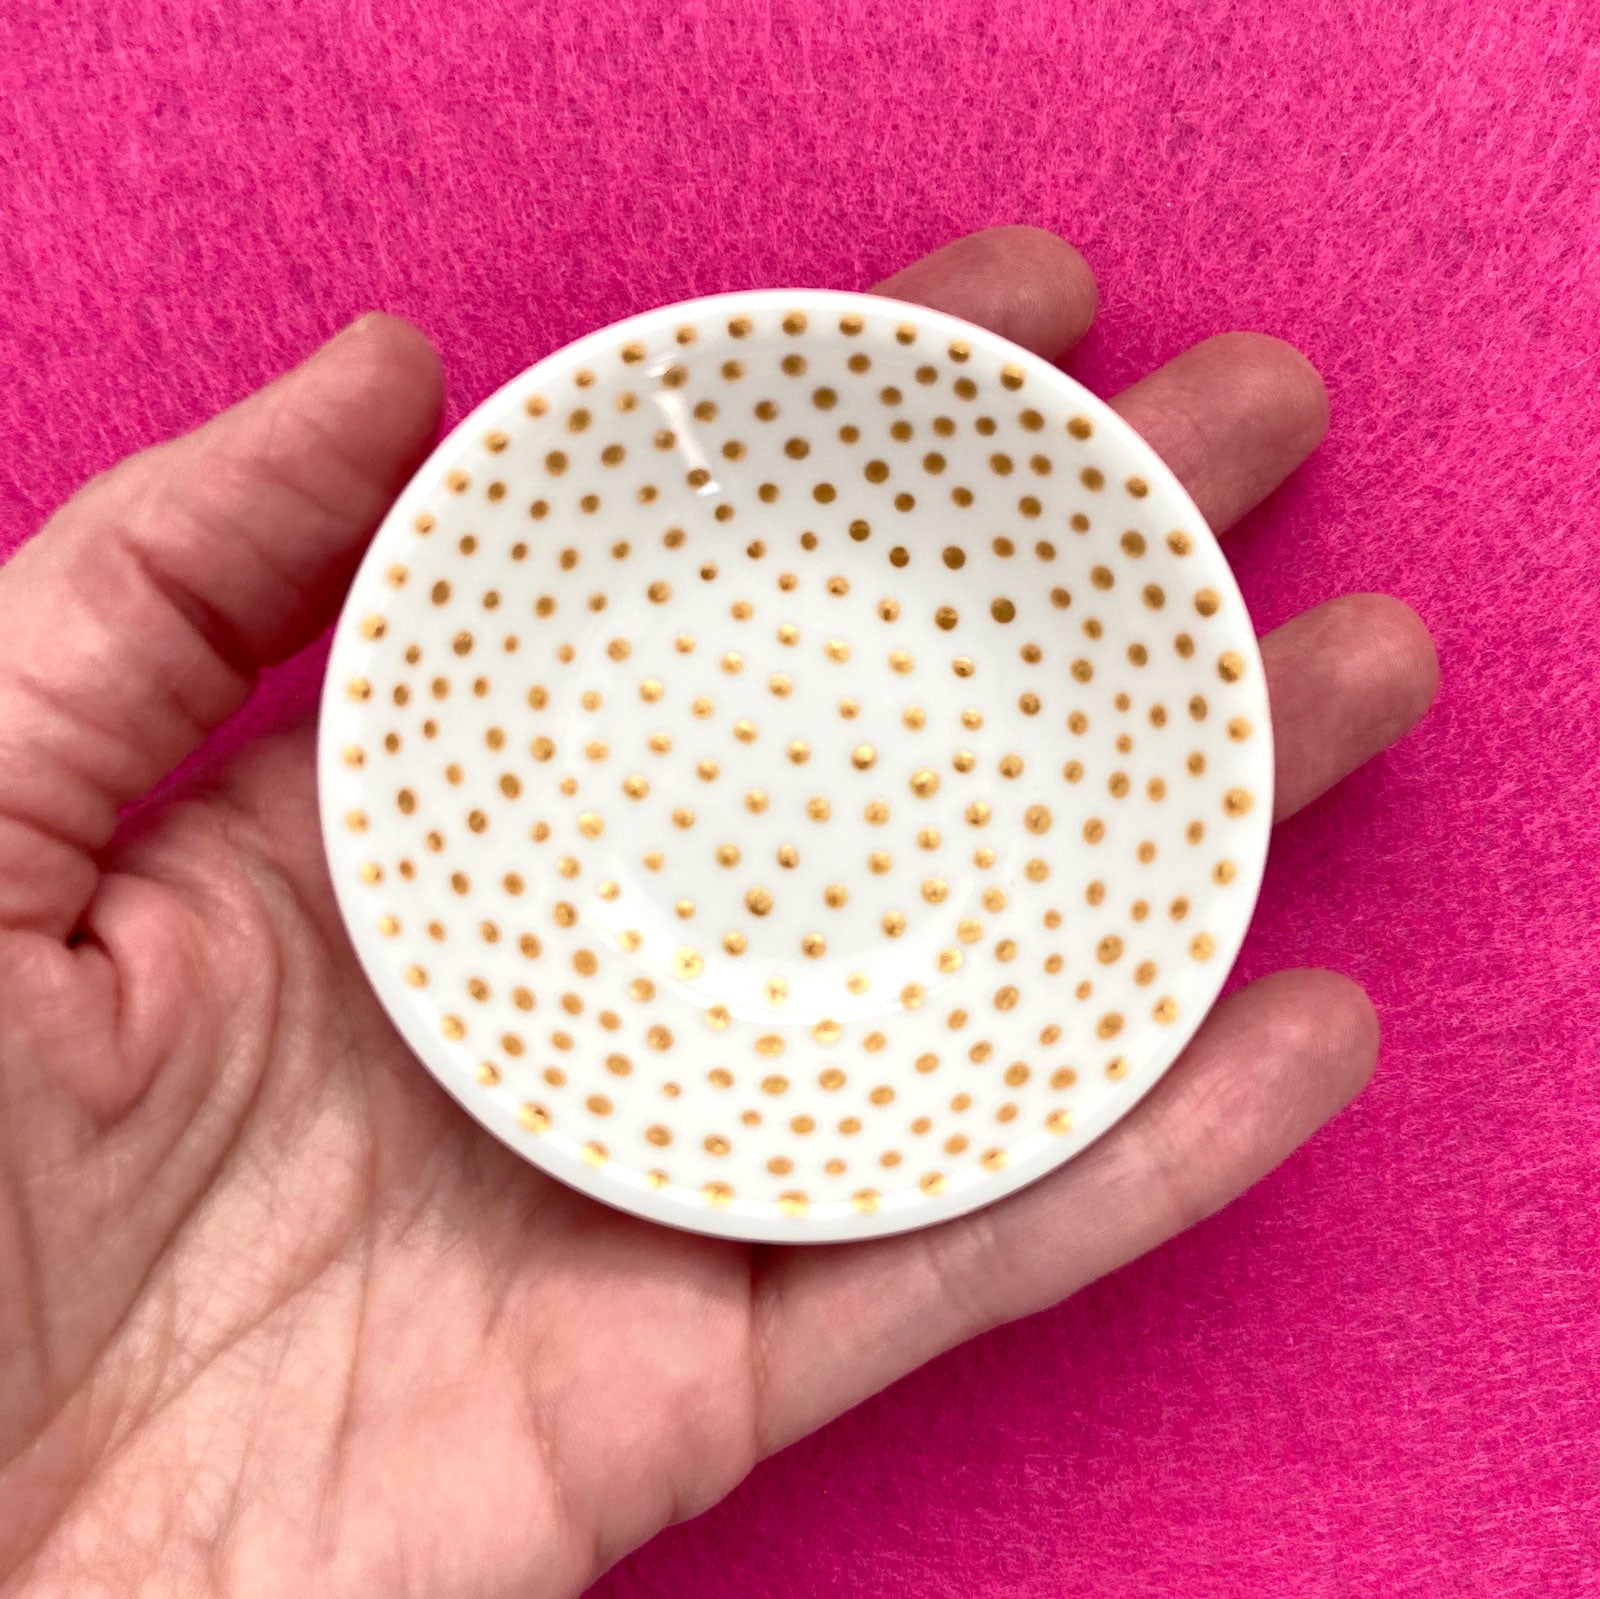 Gold Dots 1 - Hand Painted Porcelain Round Bowl